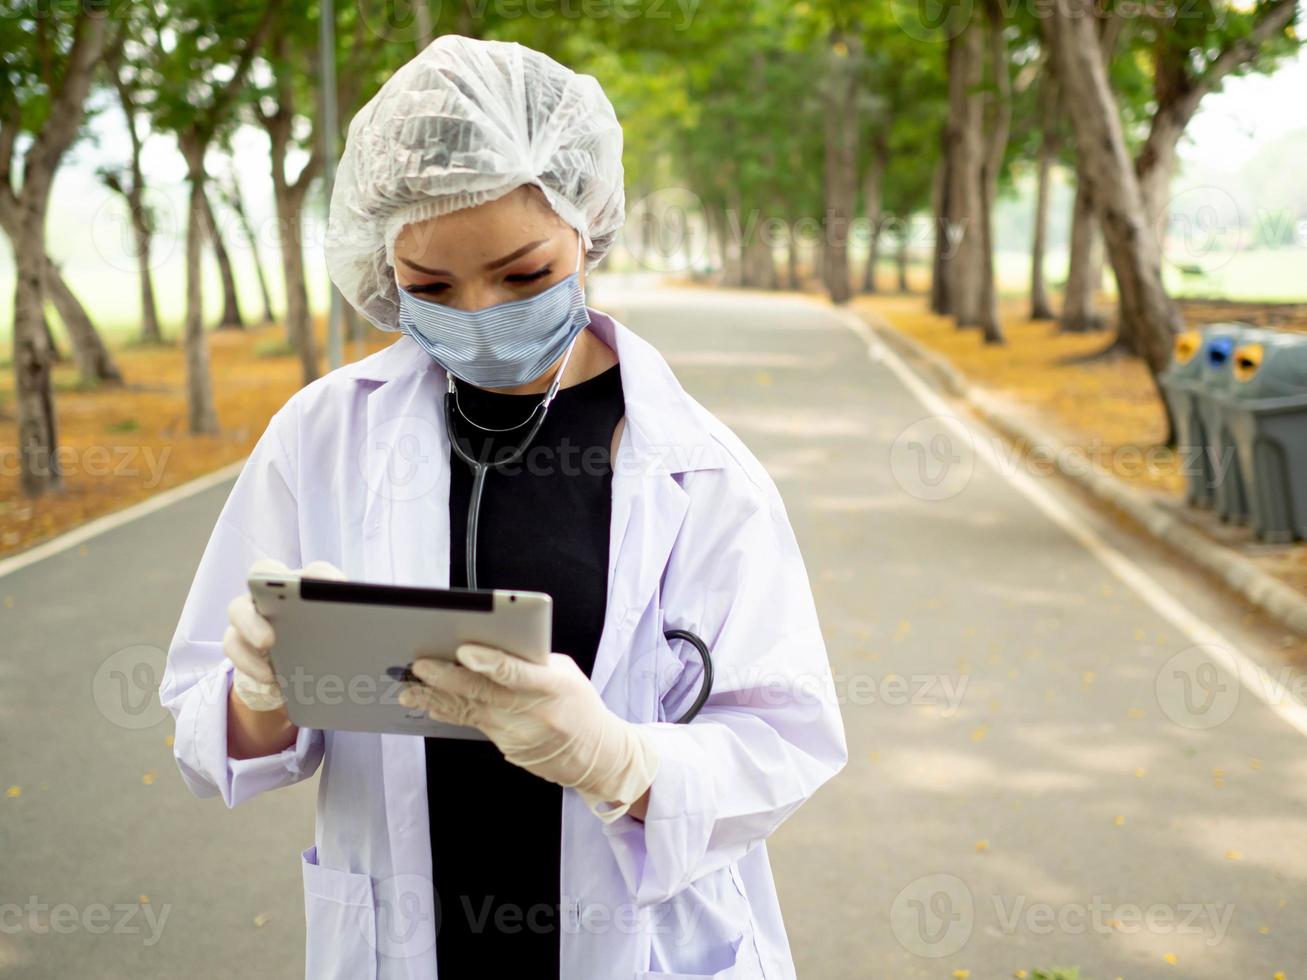 Scientist nurse doctor uniform work job caree occupation research looking natural leaf environment tablet smartphone mobile technology future green clean energy farm laboratory lifestyle professional photo